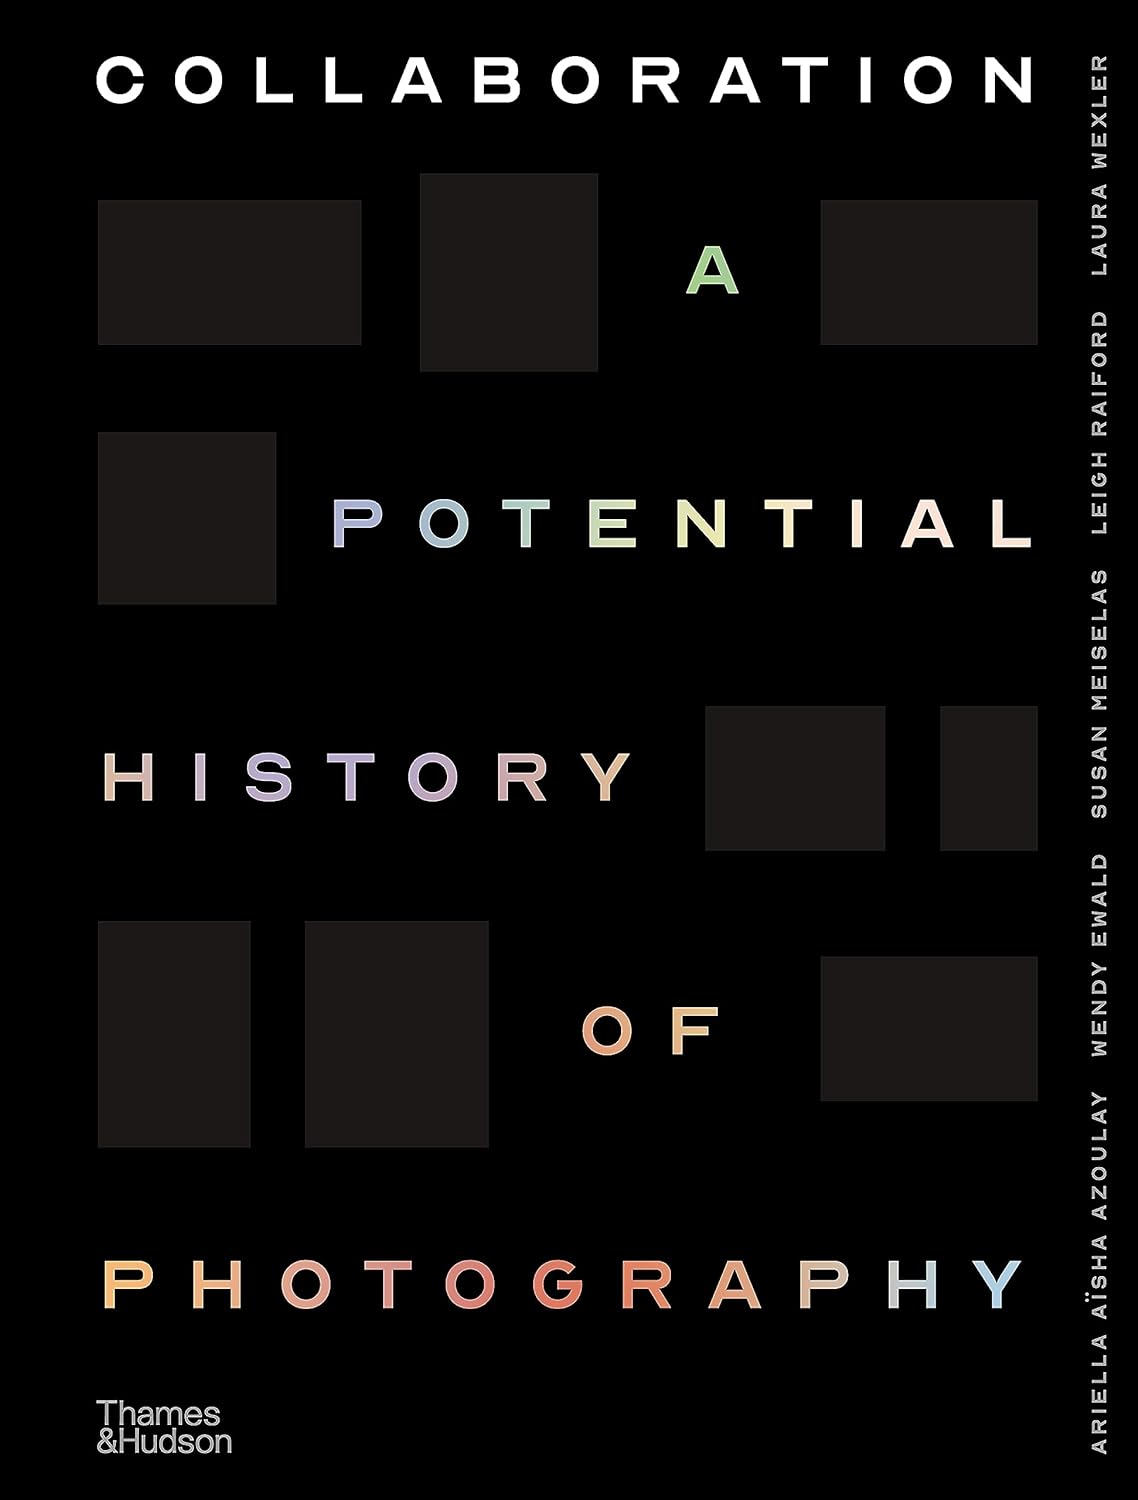 Collaboration. A Potential History of Photography joan didion what she means